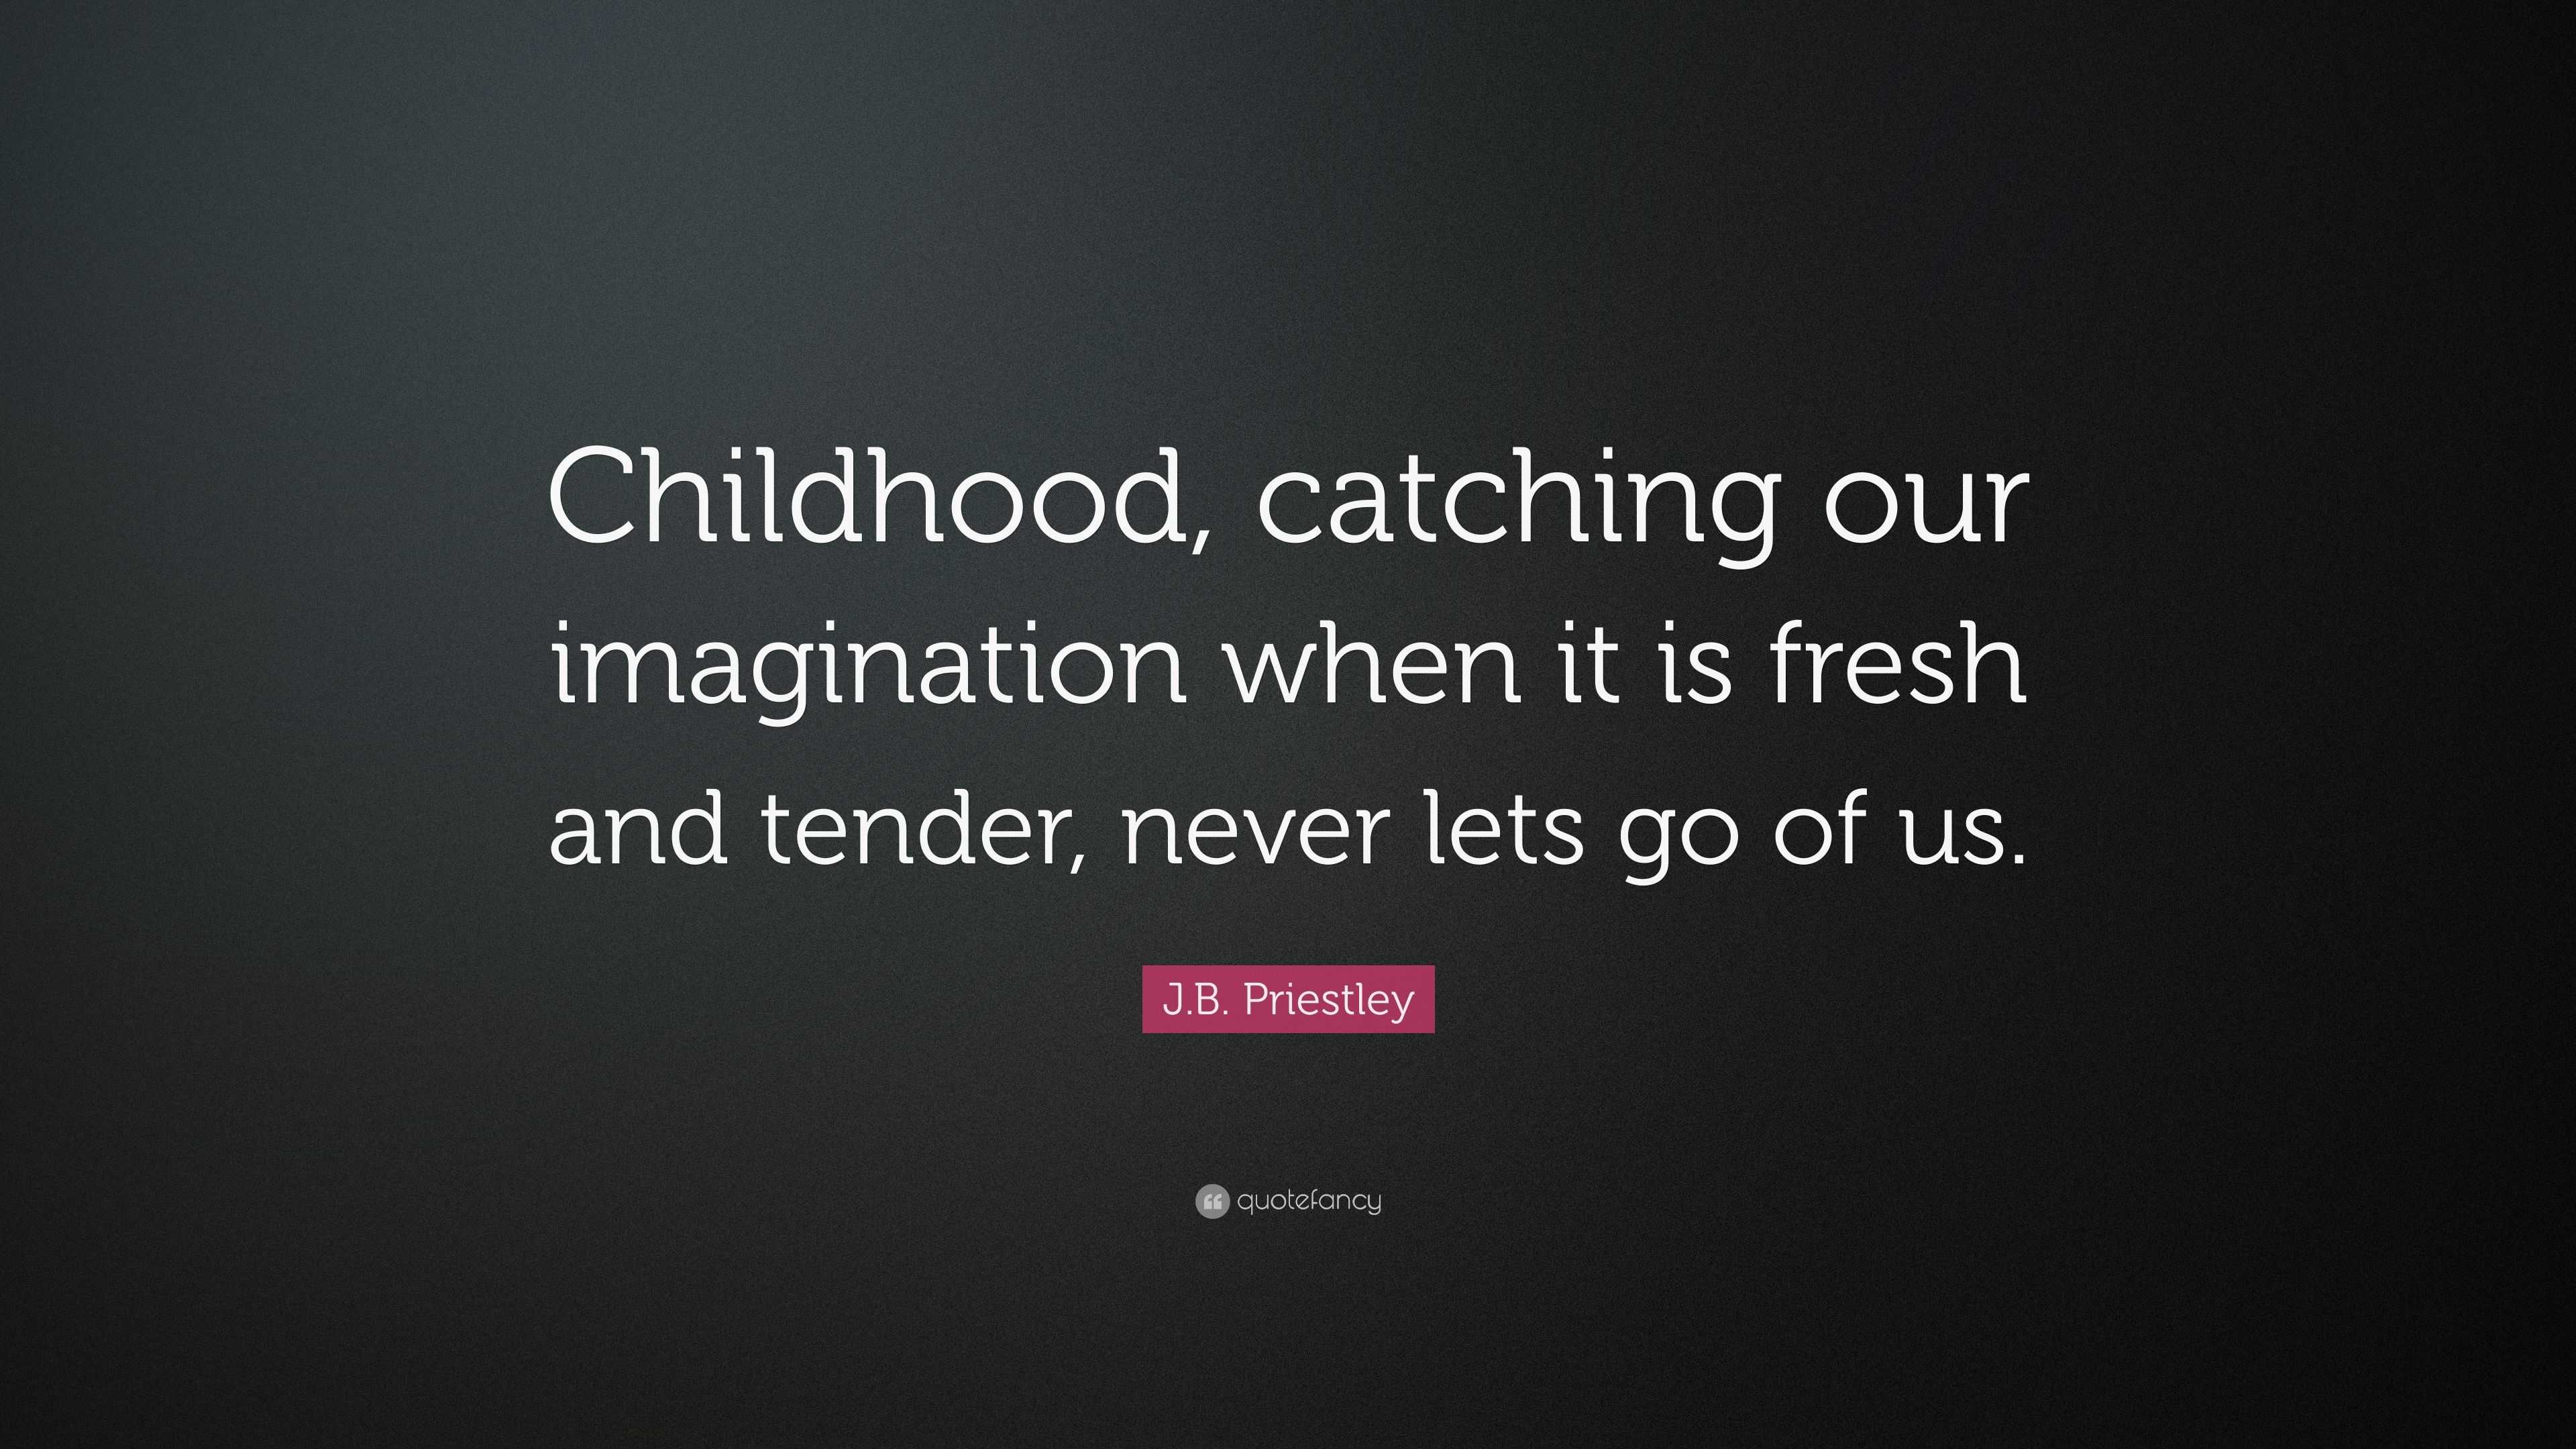 J.B. Priestley Quote: "Childhood, catching our imagination ...